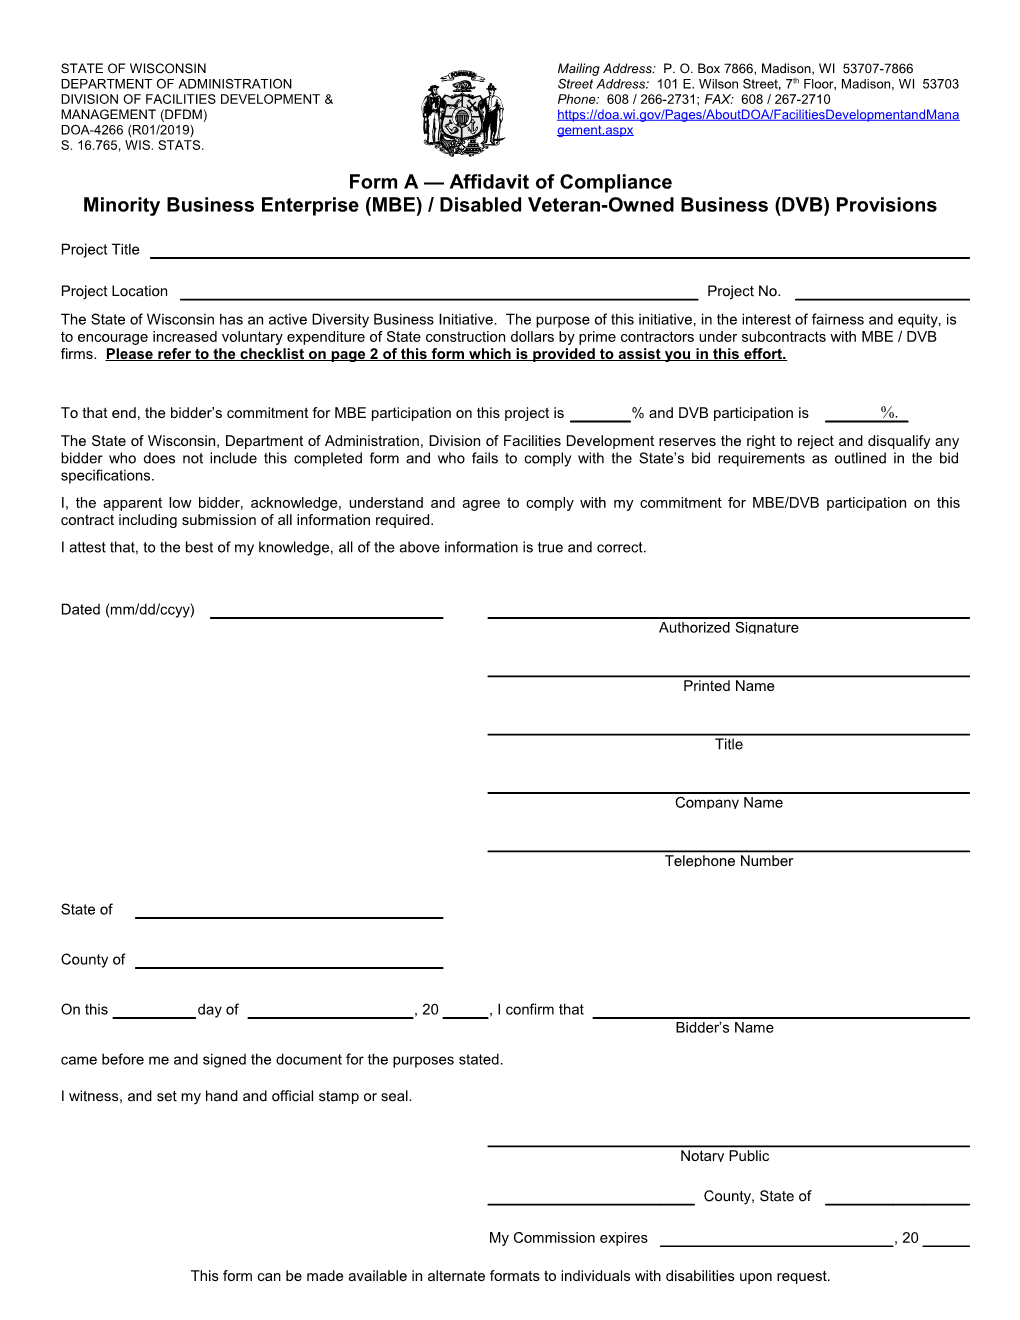 This Form Can Be Made Available in Alternate Formats to Individuals with Disabilities Upon